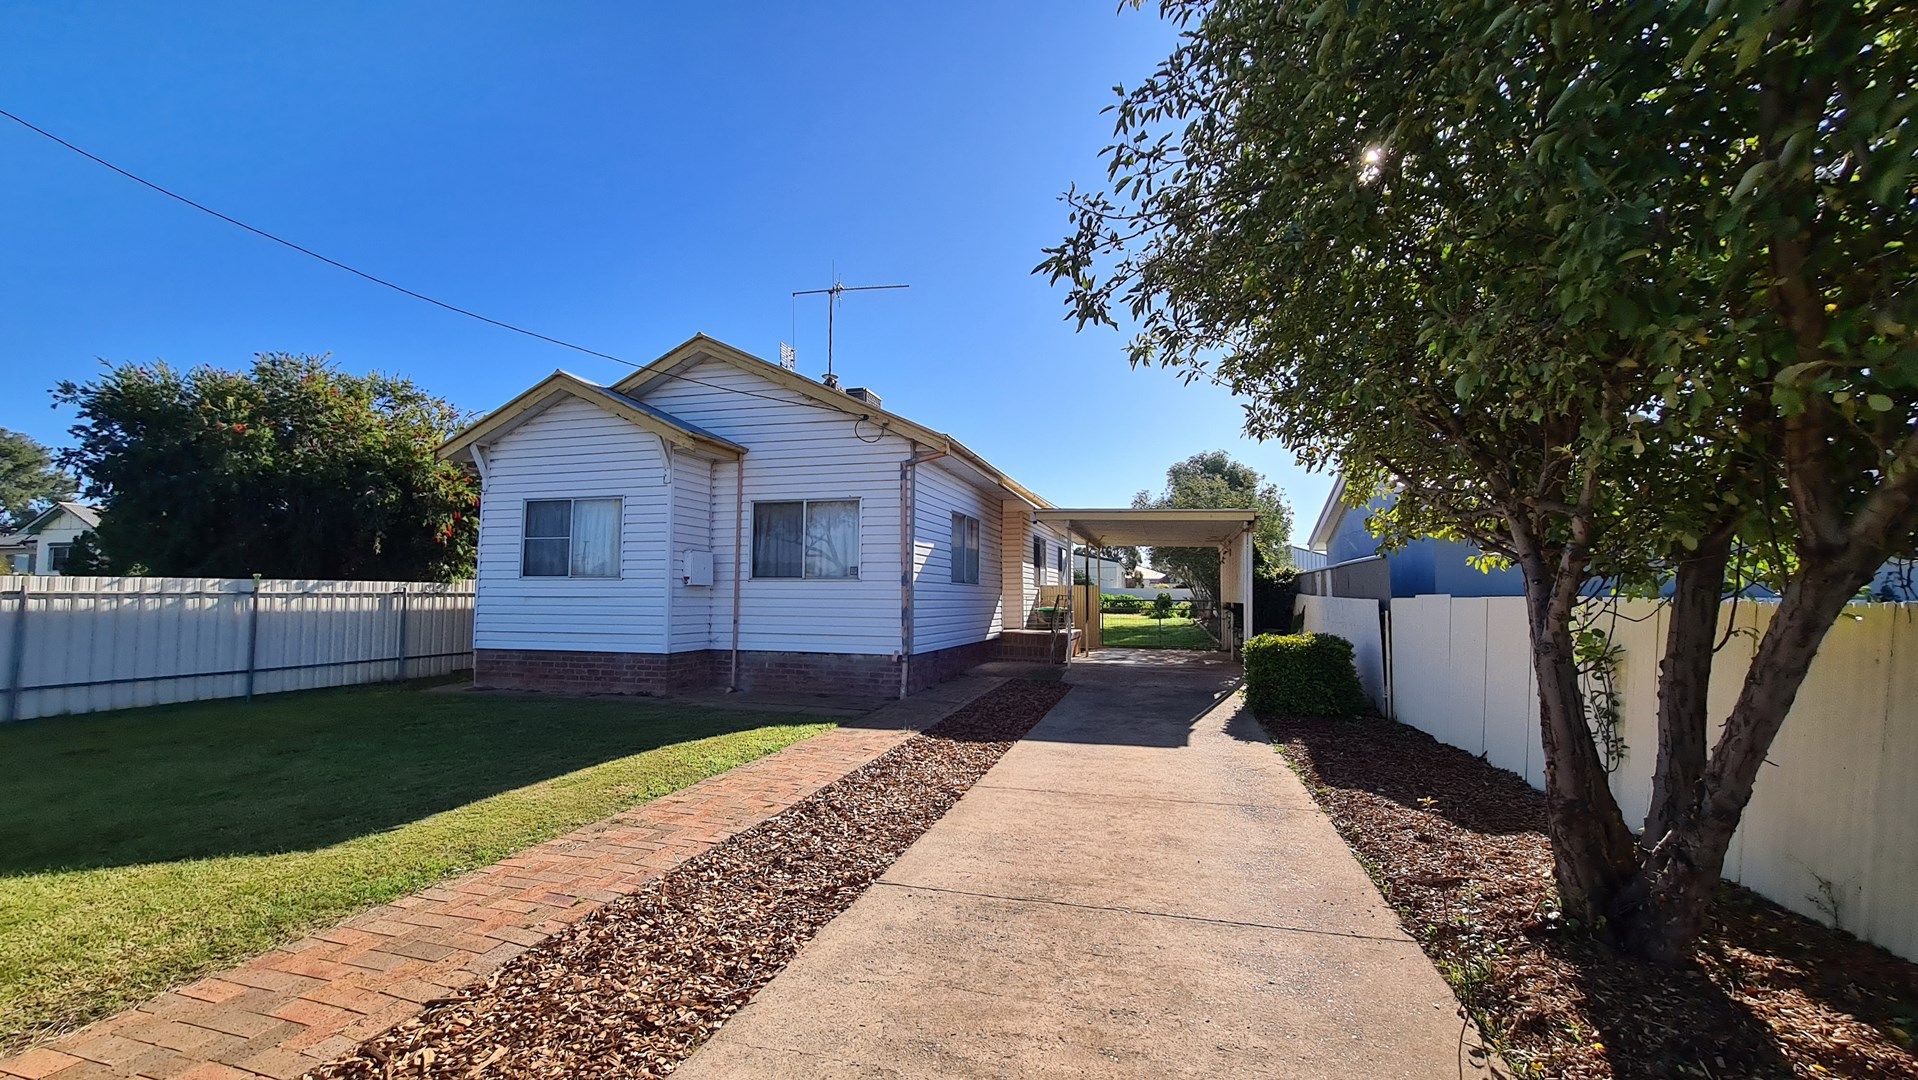 3 bedrooms House in 26 Grenfell Street PARKES NSW, 2870